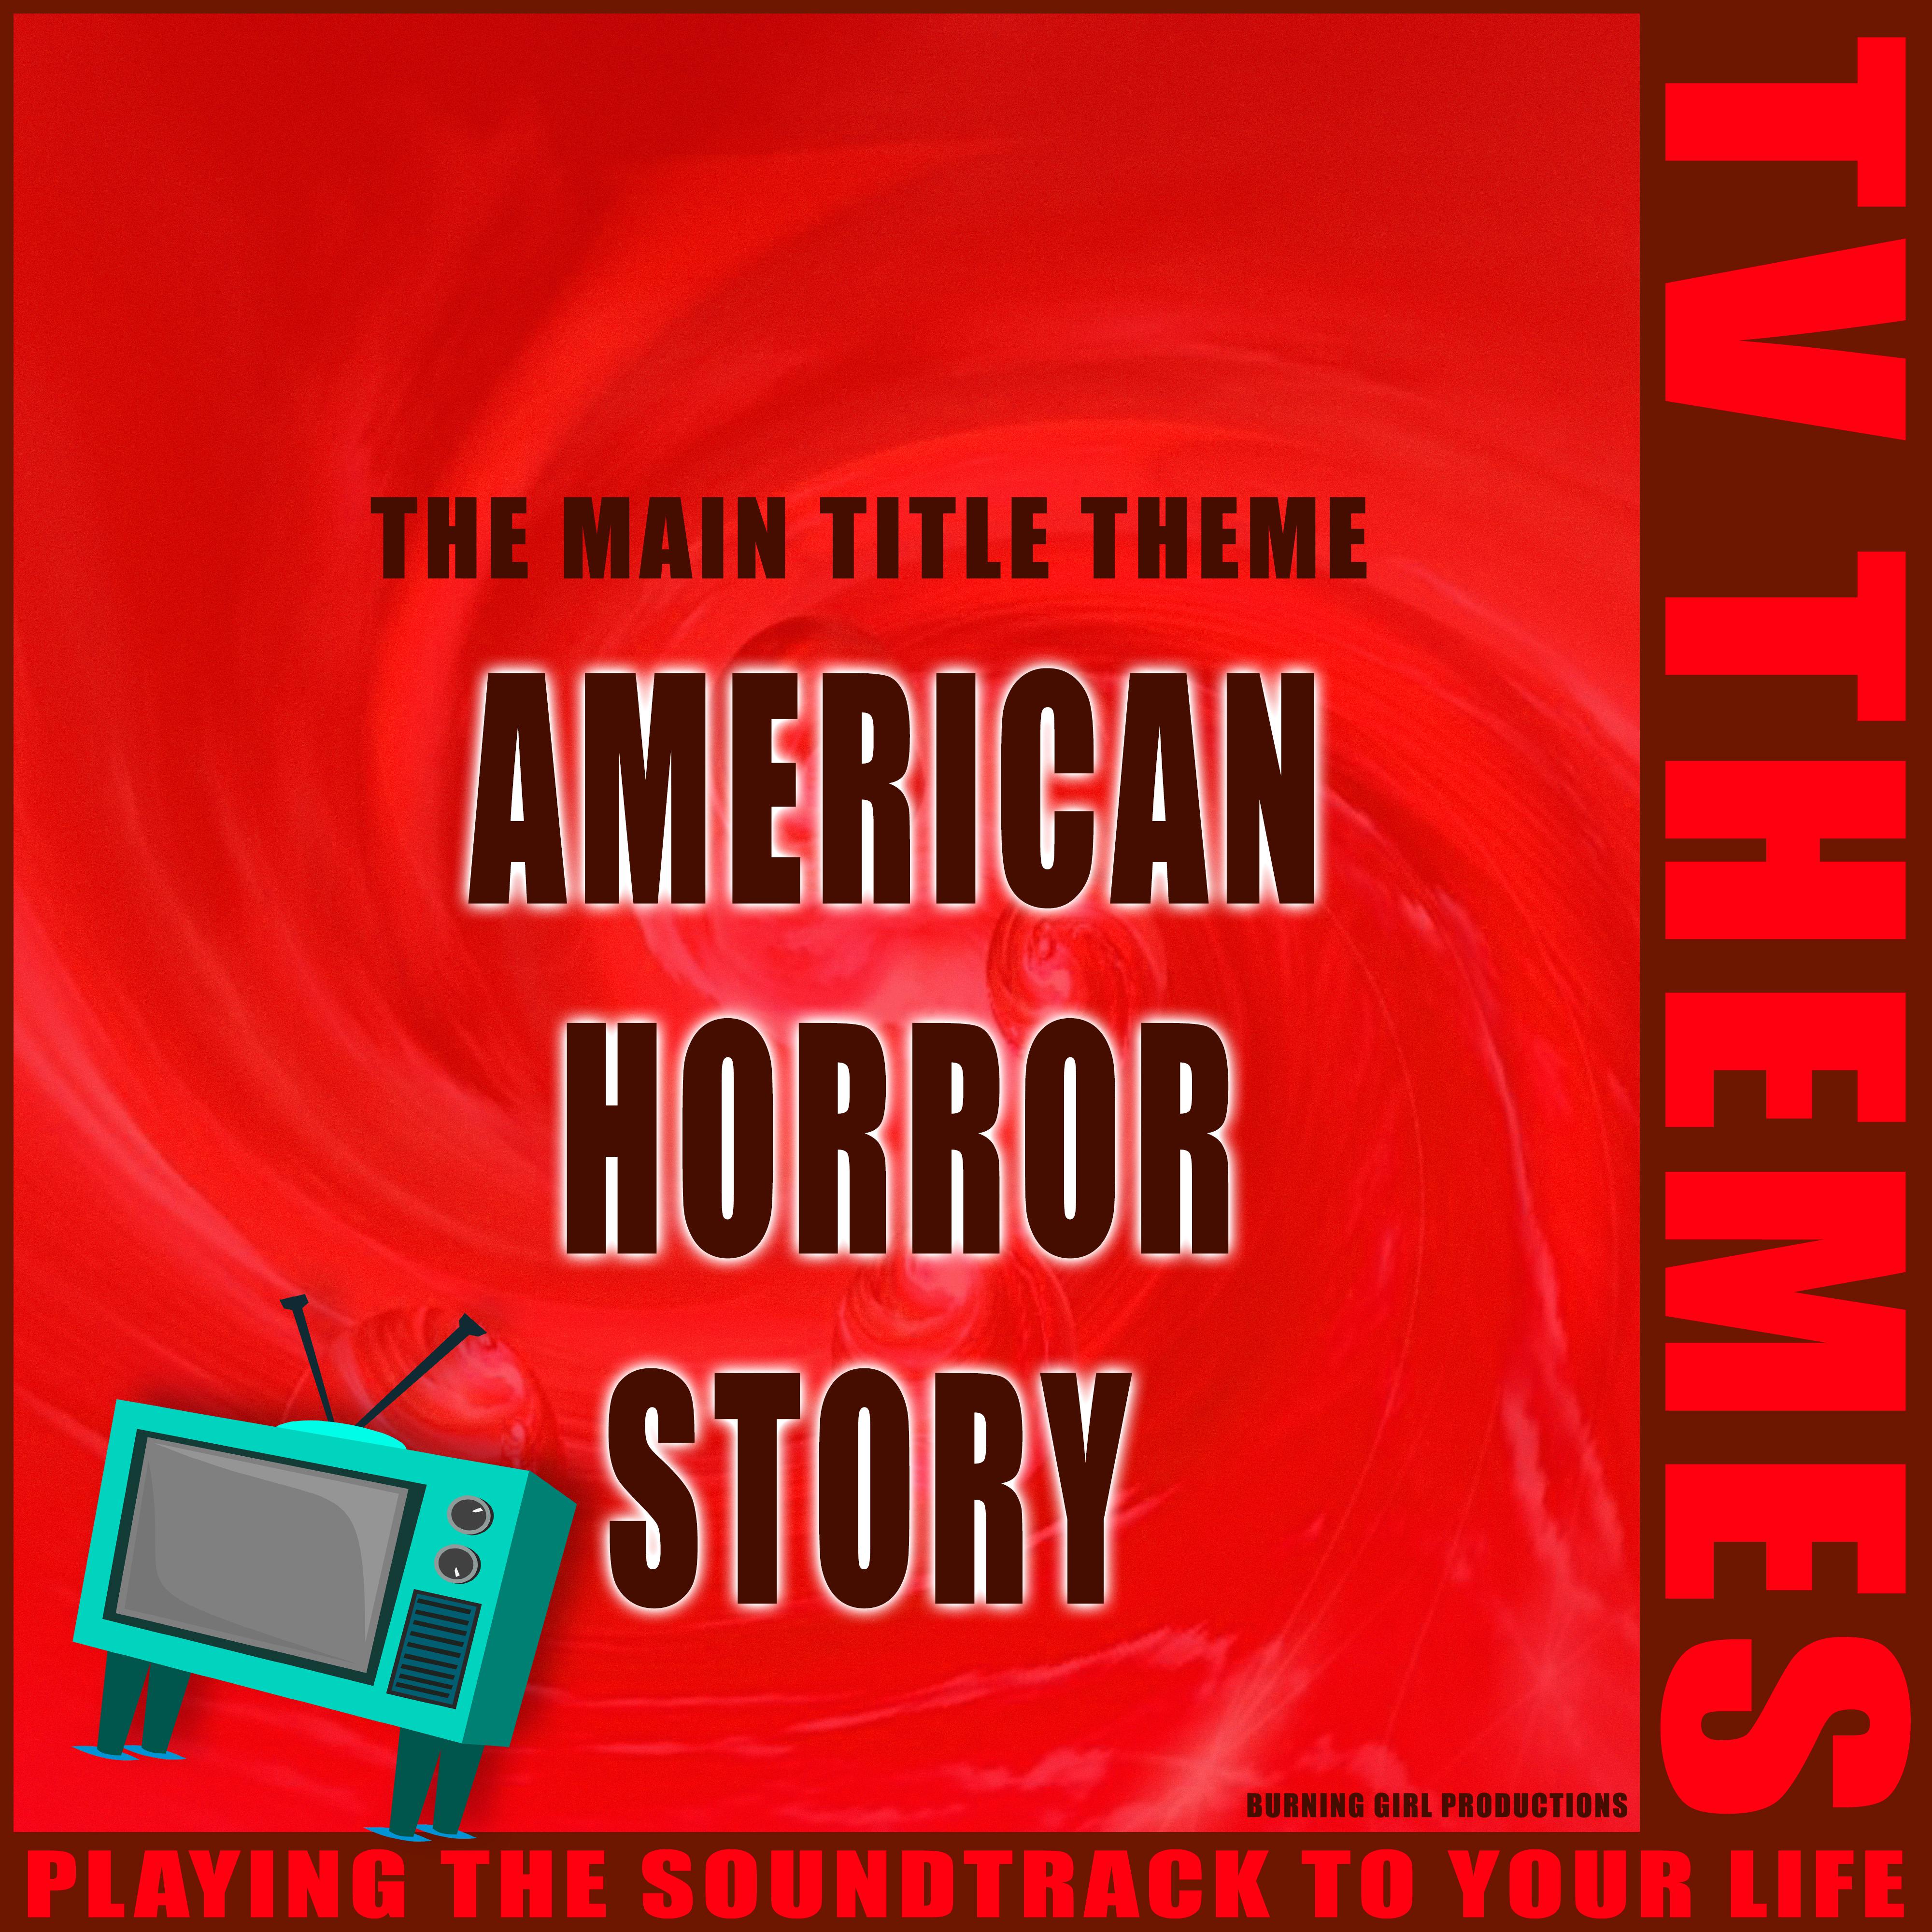 The Main Title Theme - American Horror Story